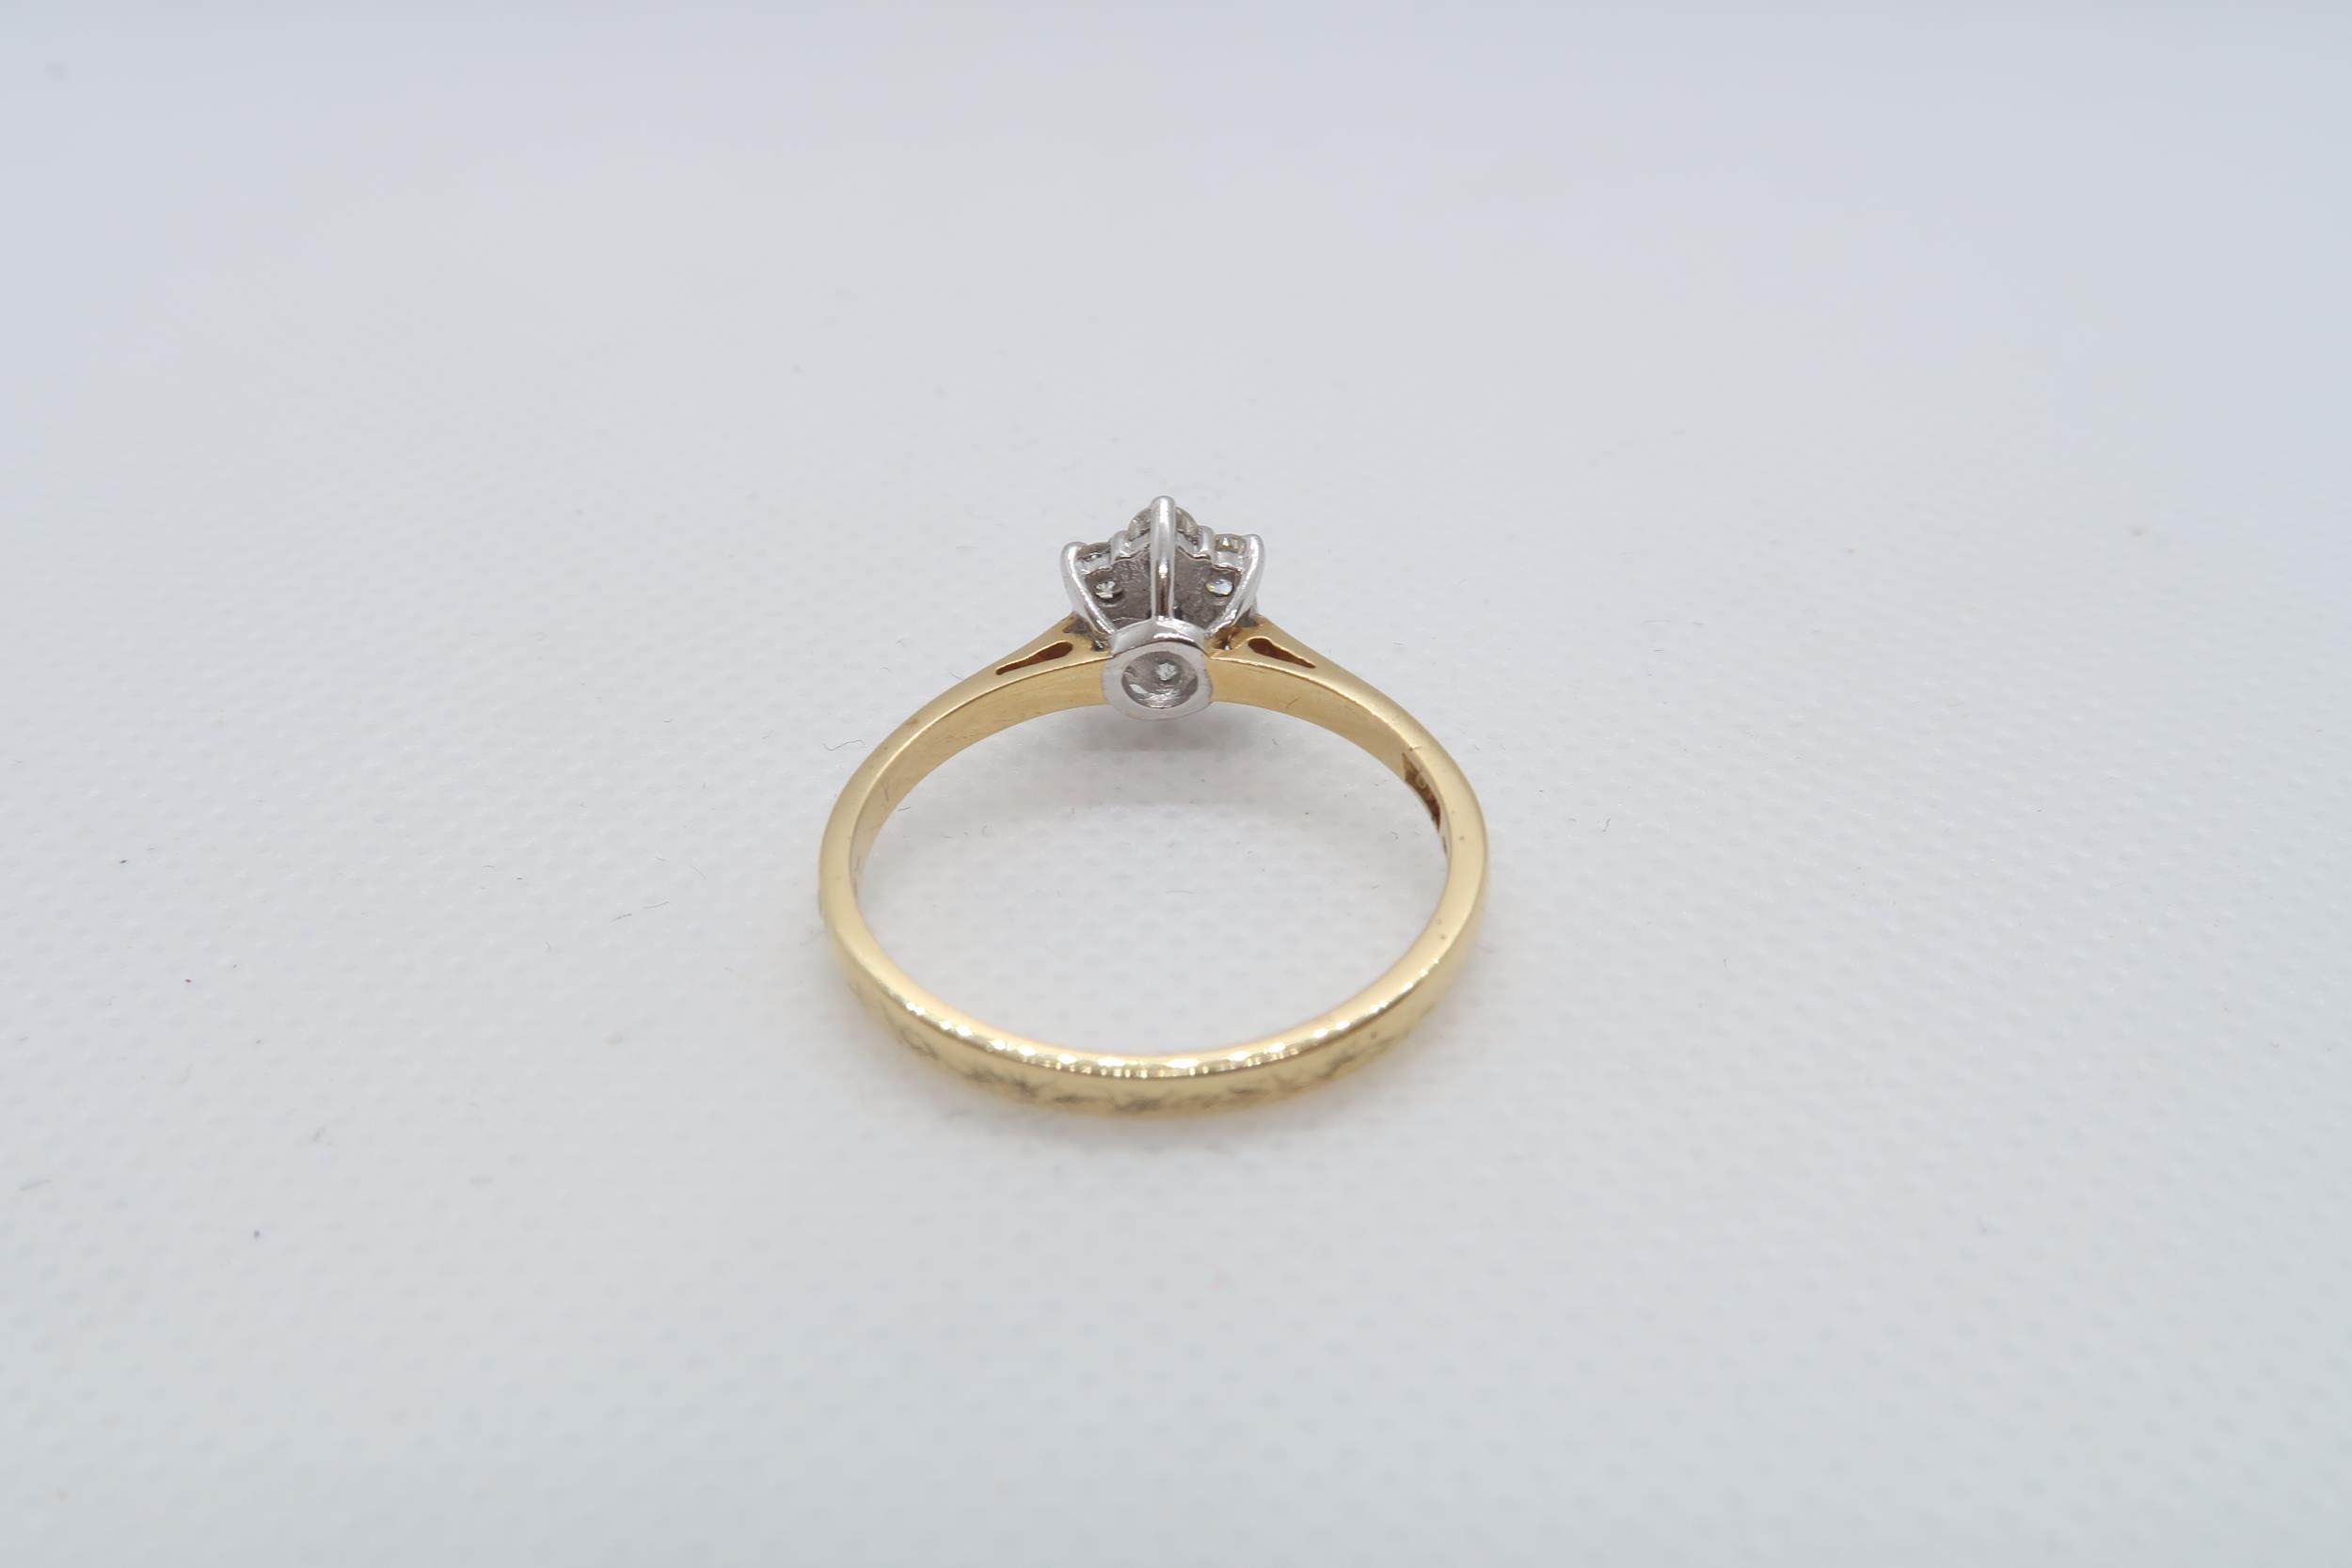 An 18ct yellow gold (hallmarked) and diamond daisy cluster ring size V - approx weight 3.7 grams - Image 3 of 4